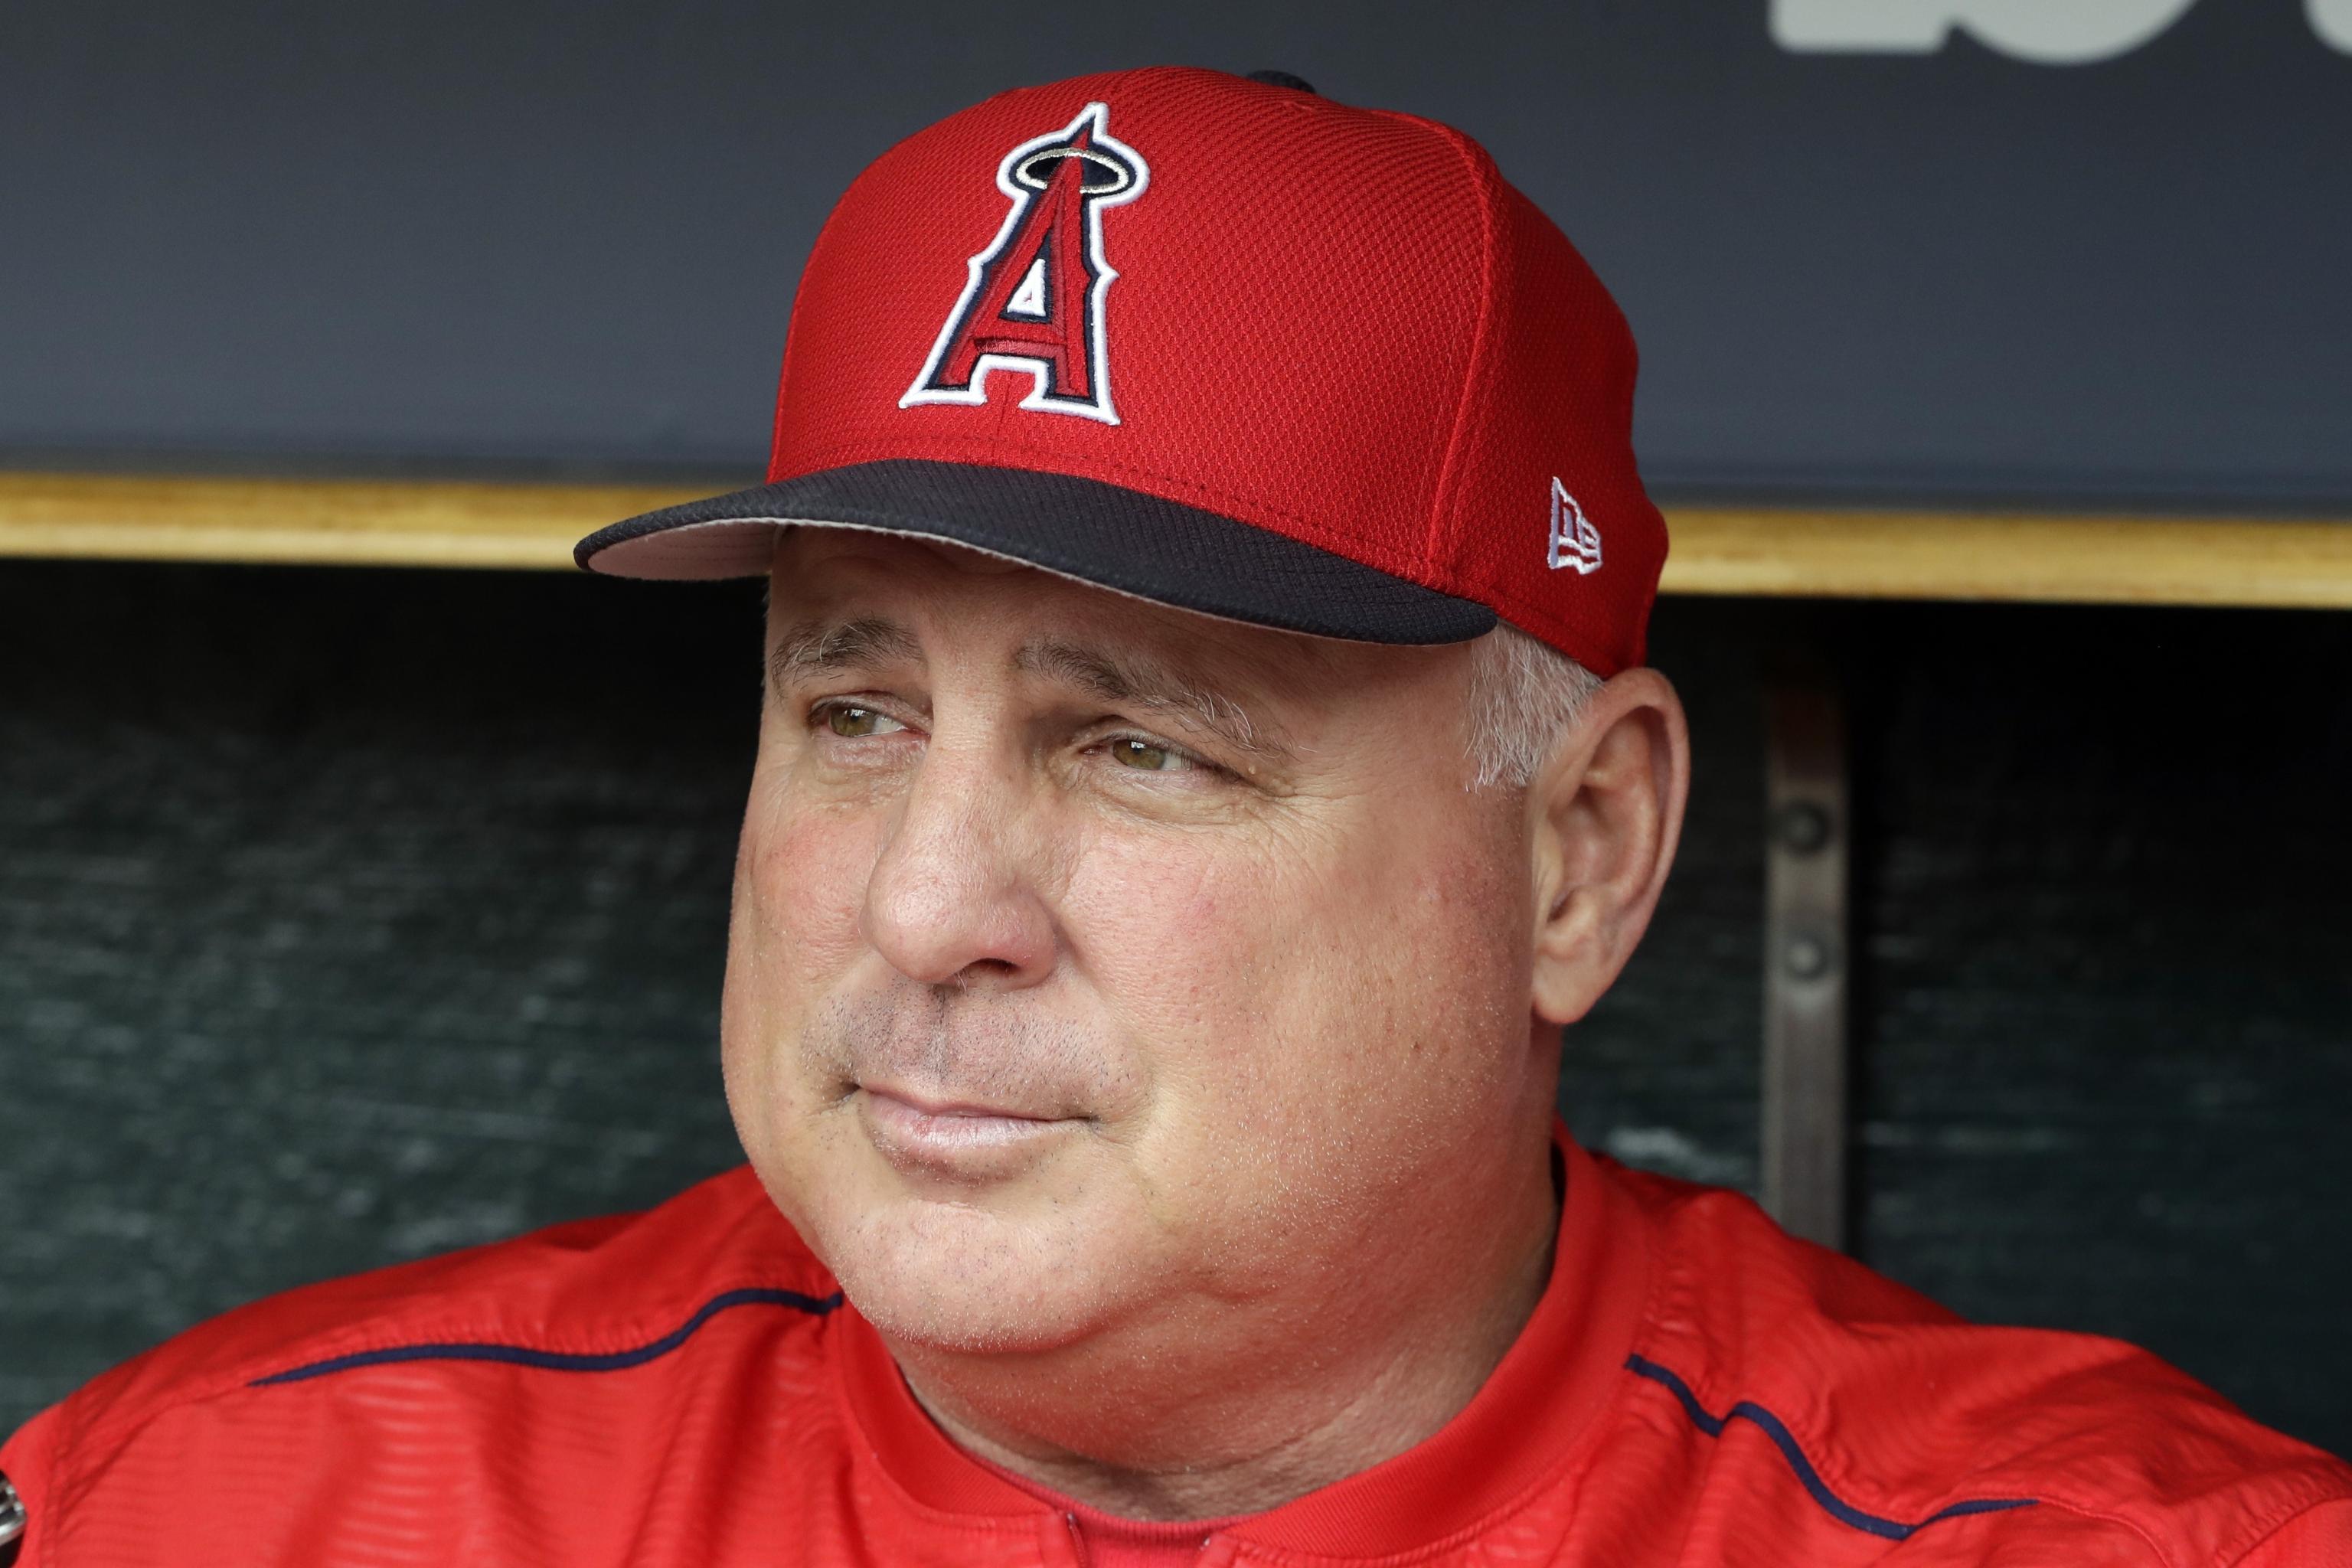 Mike Scioscia won't return as Angels manager in 2019 - Los Angeles Times